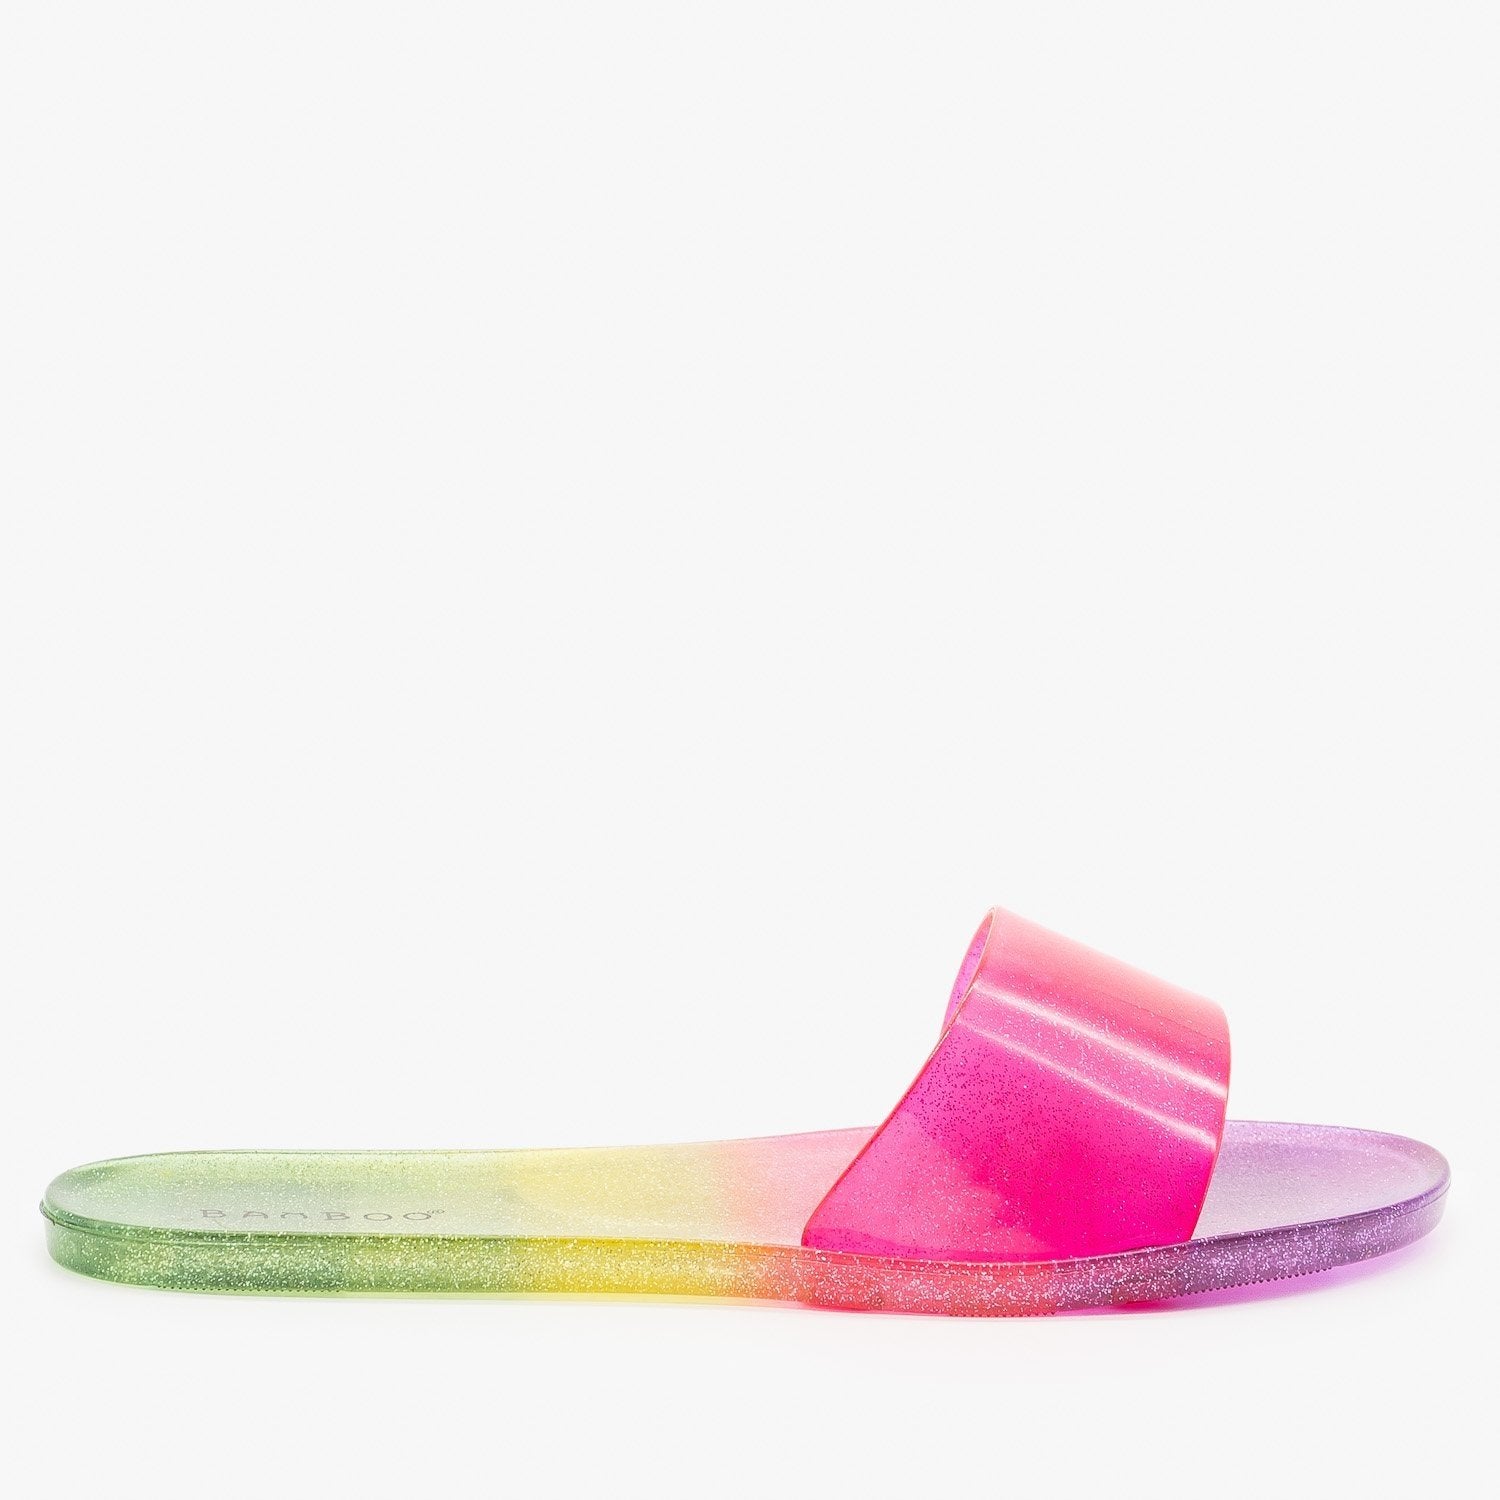 women's jelly sandals size 11